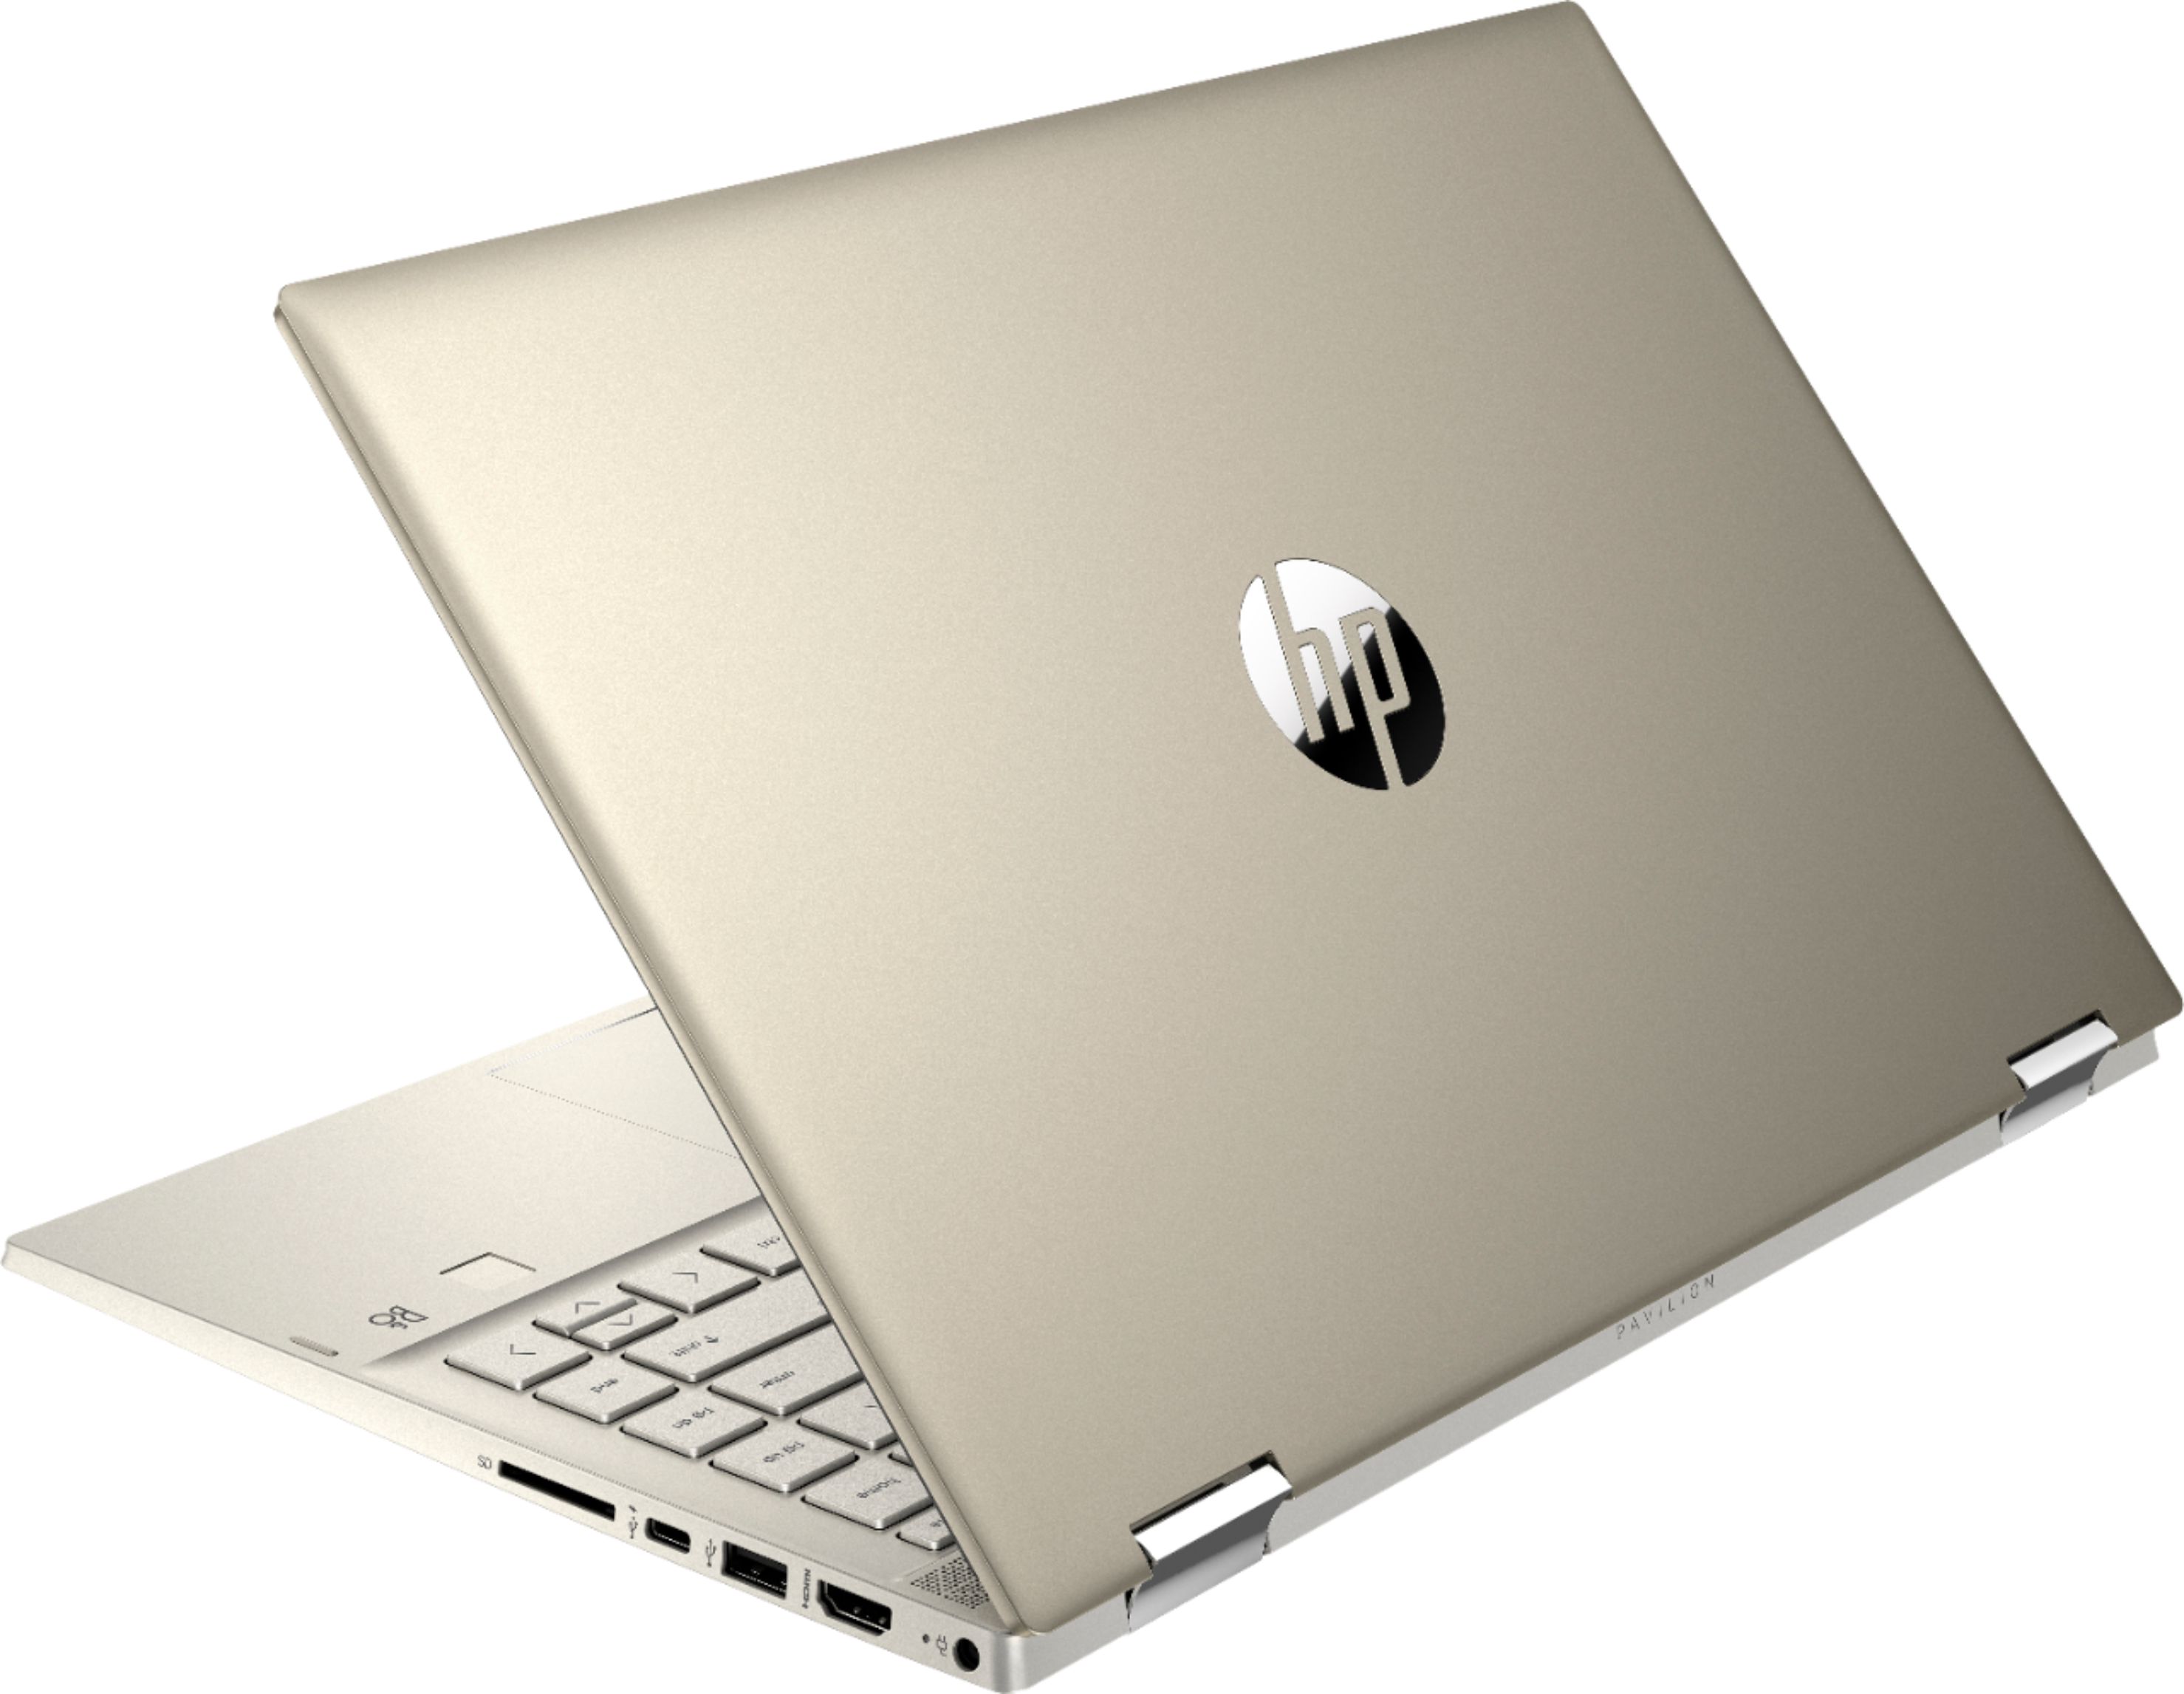 Customer Reviews Hp Pavilion X360 2 In 1 14 Touch Screen Laptop Intel Core I5 8gb Memory 256gb 1499